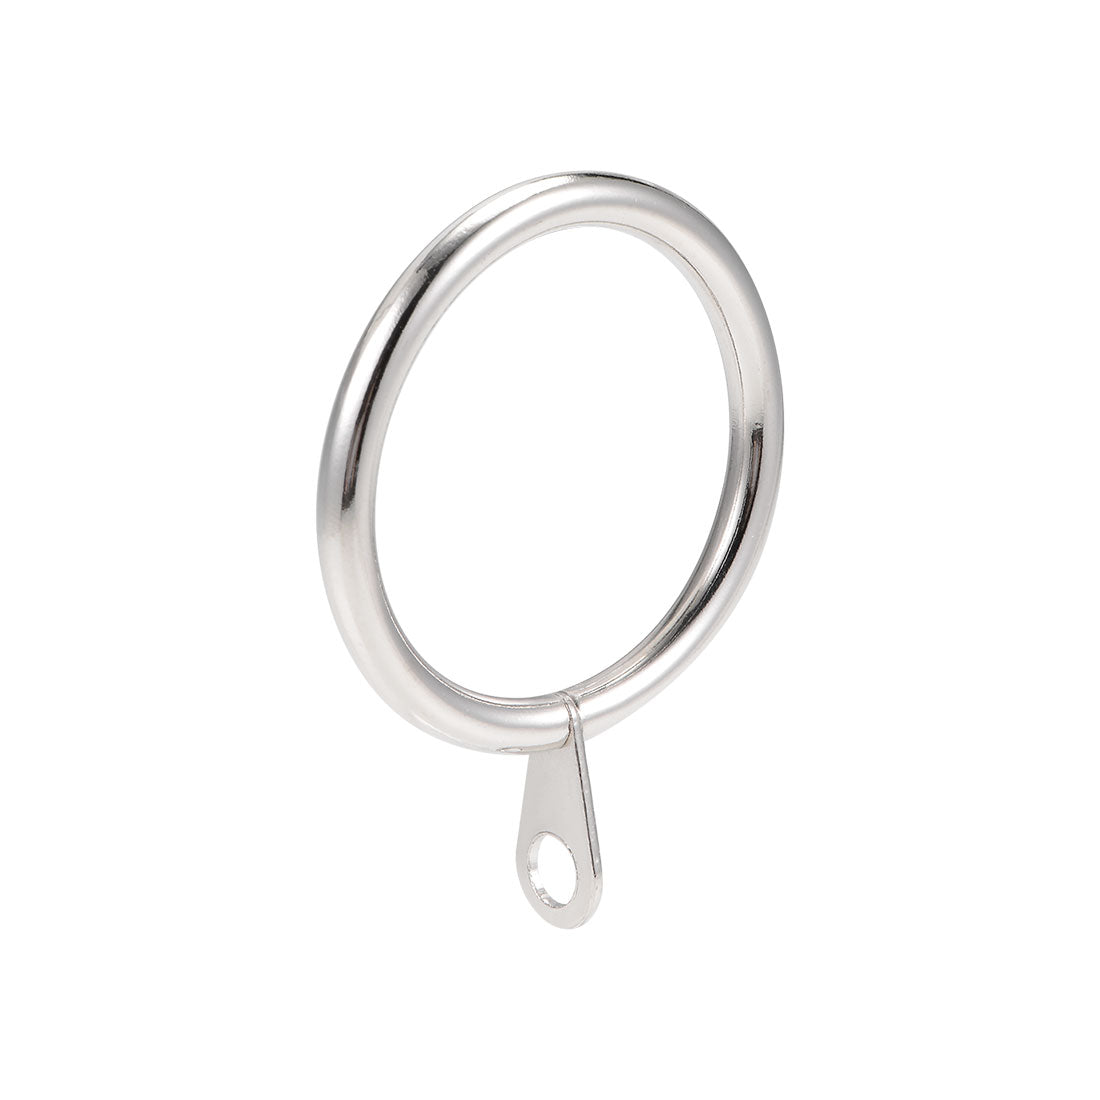 uxcell Uxcell Curtain Ring Metal 32mm Inner Dia Drapery Ring for Curtain Rods Silver Tone 7 Pcs